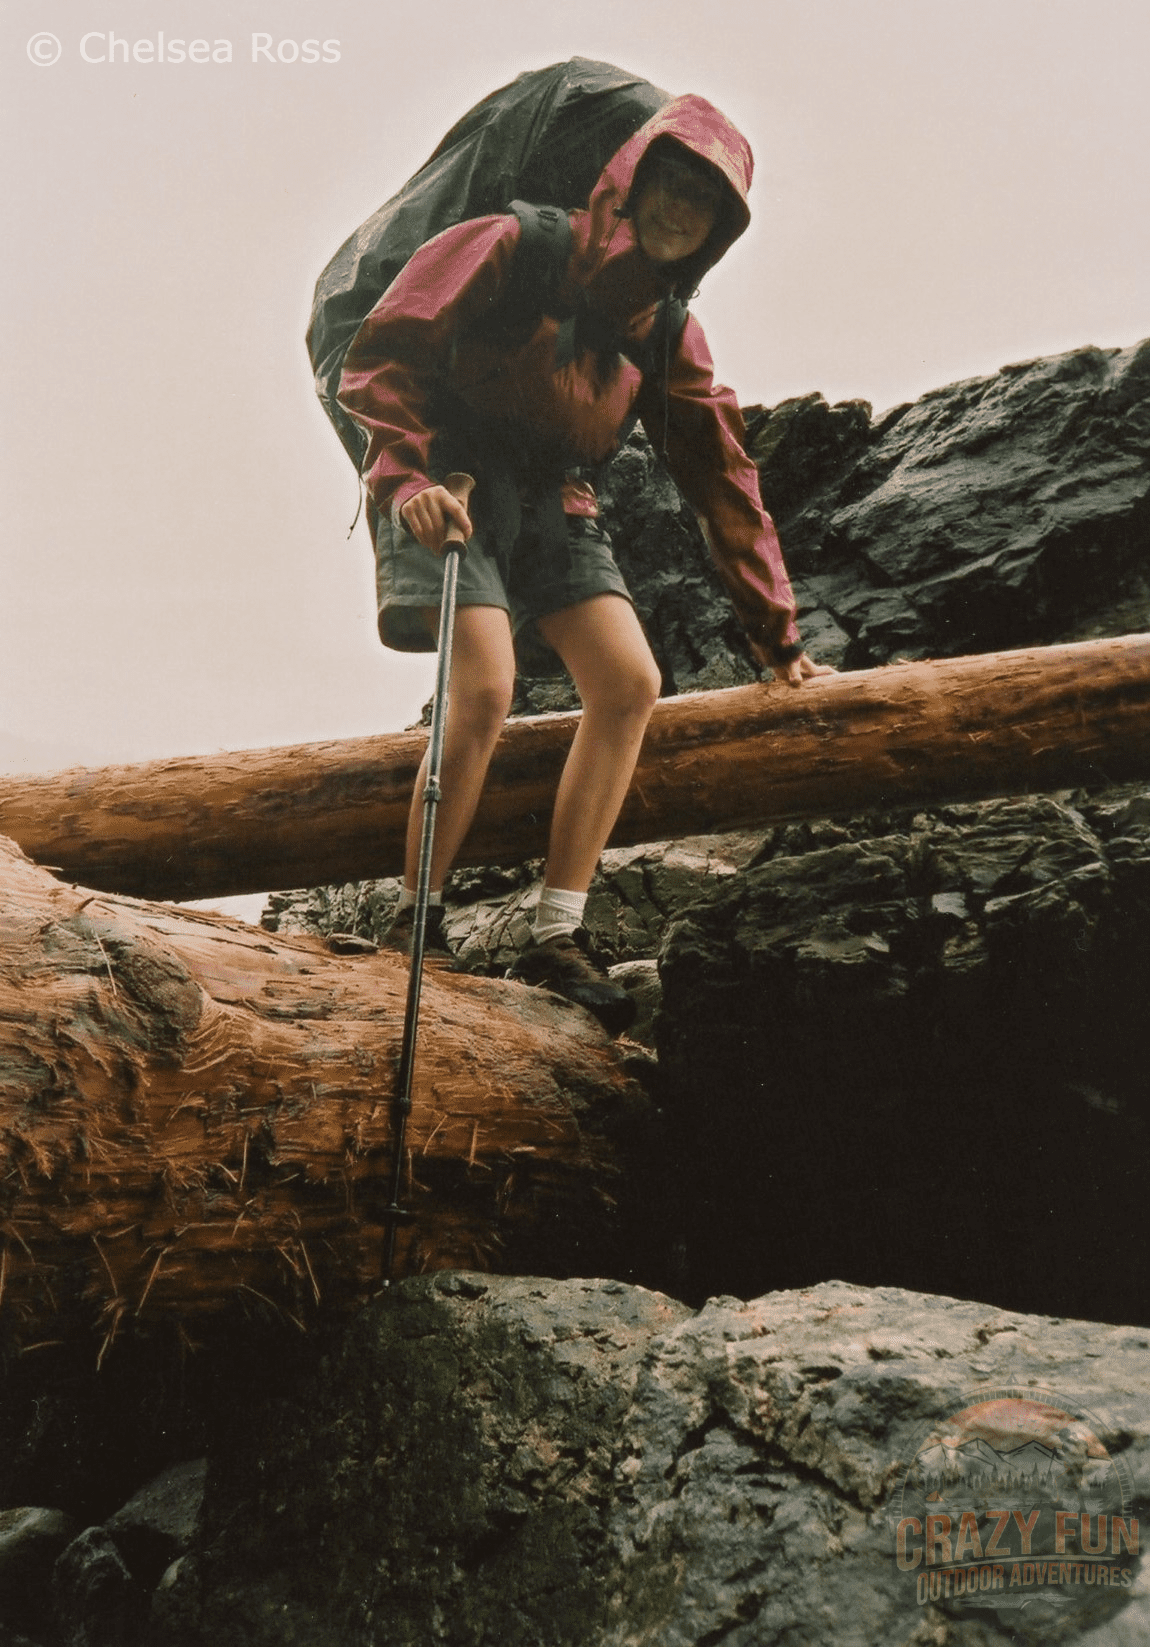 West Coast Trail tips: Beware of boulders and logs on the trail. Girl going on top of rocks having to hop over logs as we hike on the beach backpacking the West Coast Trail